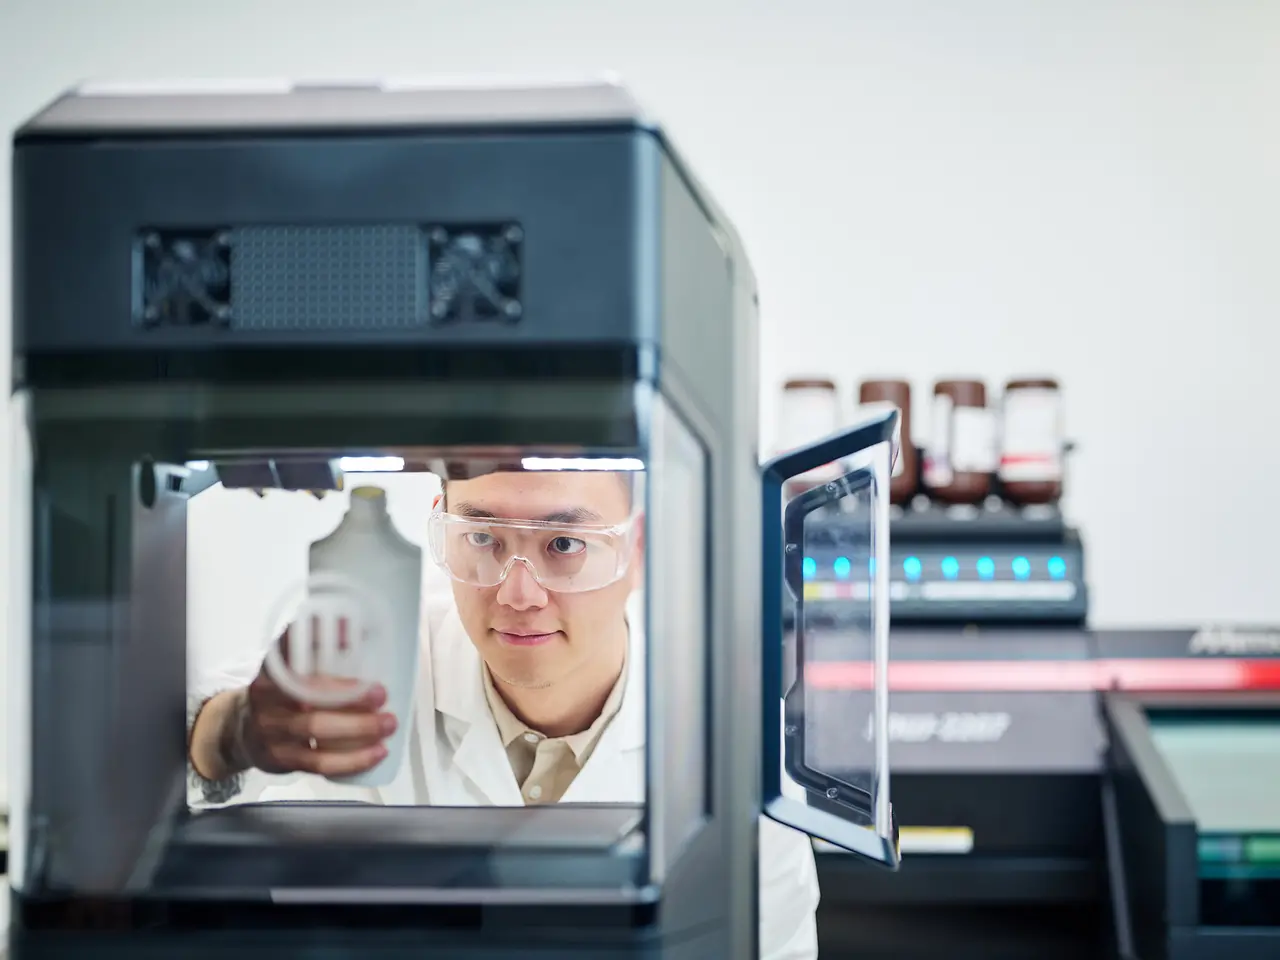 
Henkel expert leverages 3D printers for rapid prototyping and iteration of product packaging, accelerating the development of innovative projects.